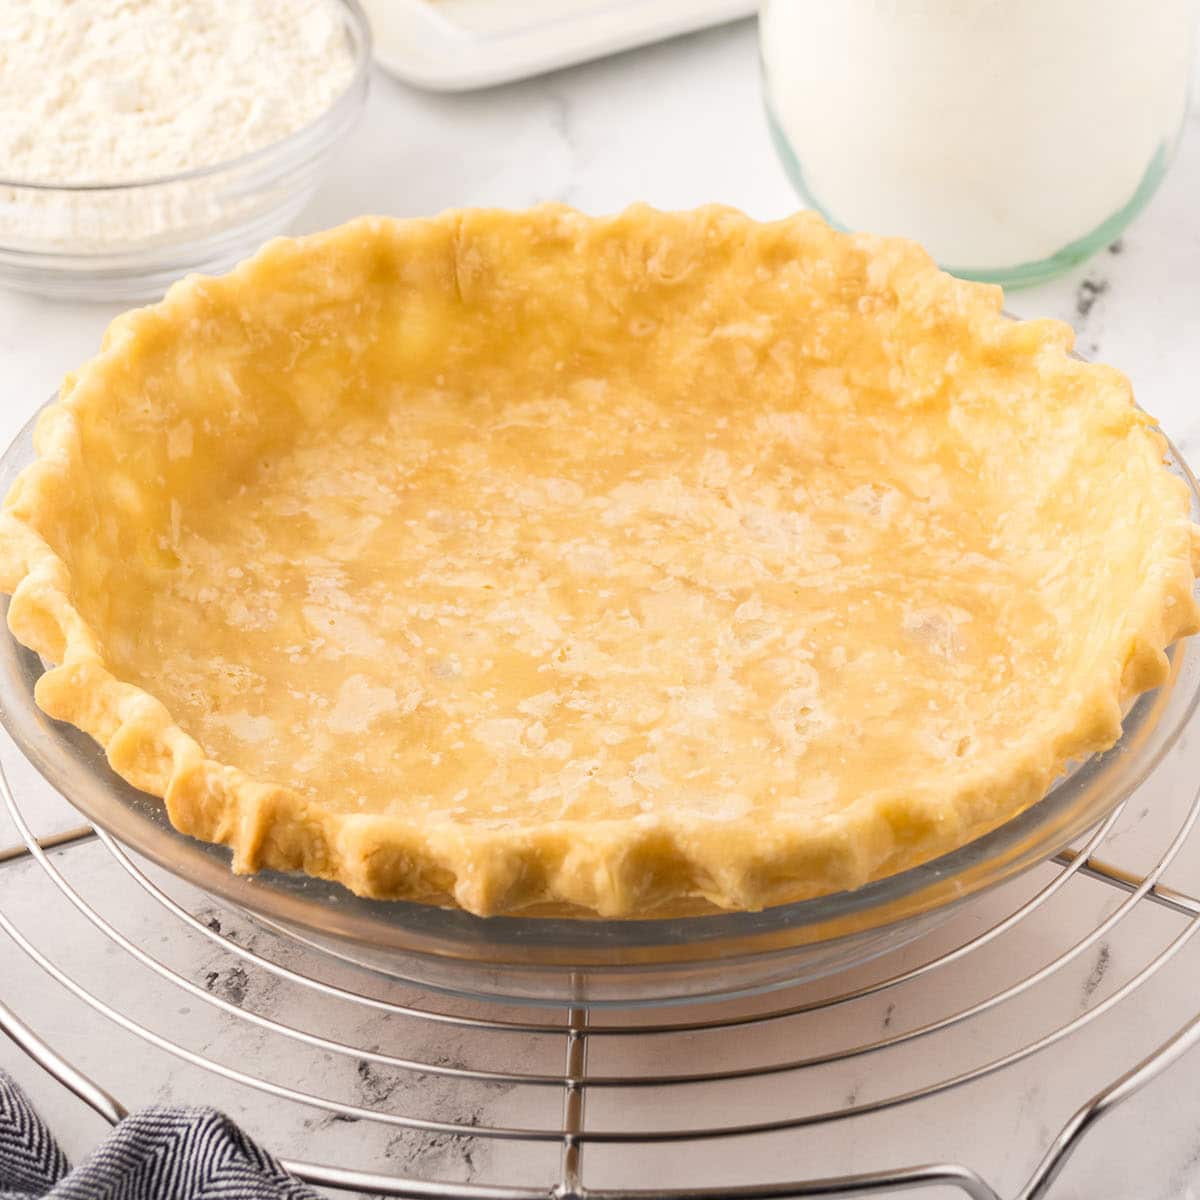 Baked pie crust on a glass pie dish.